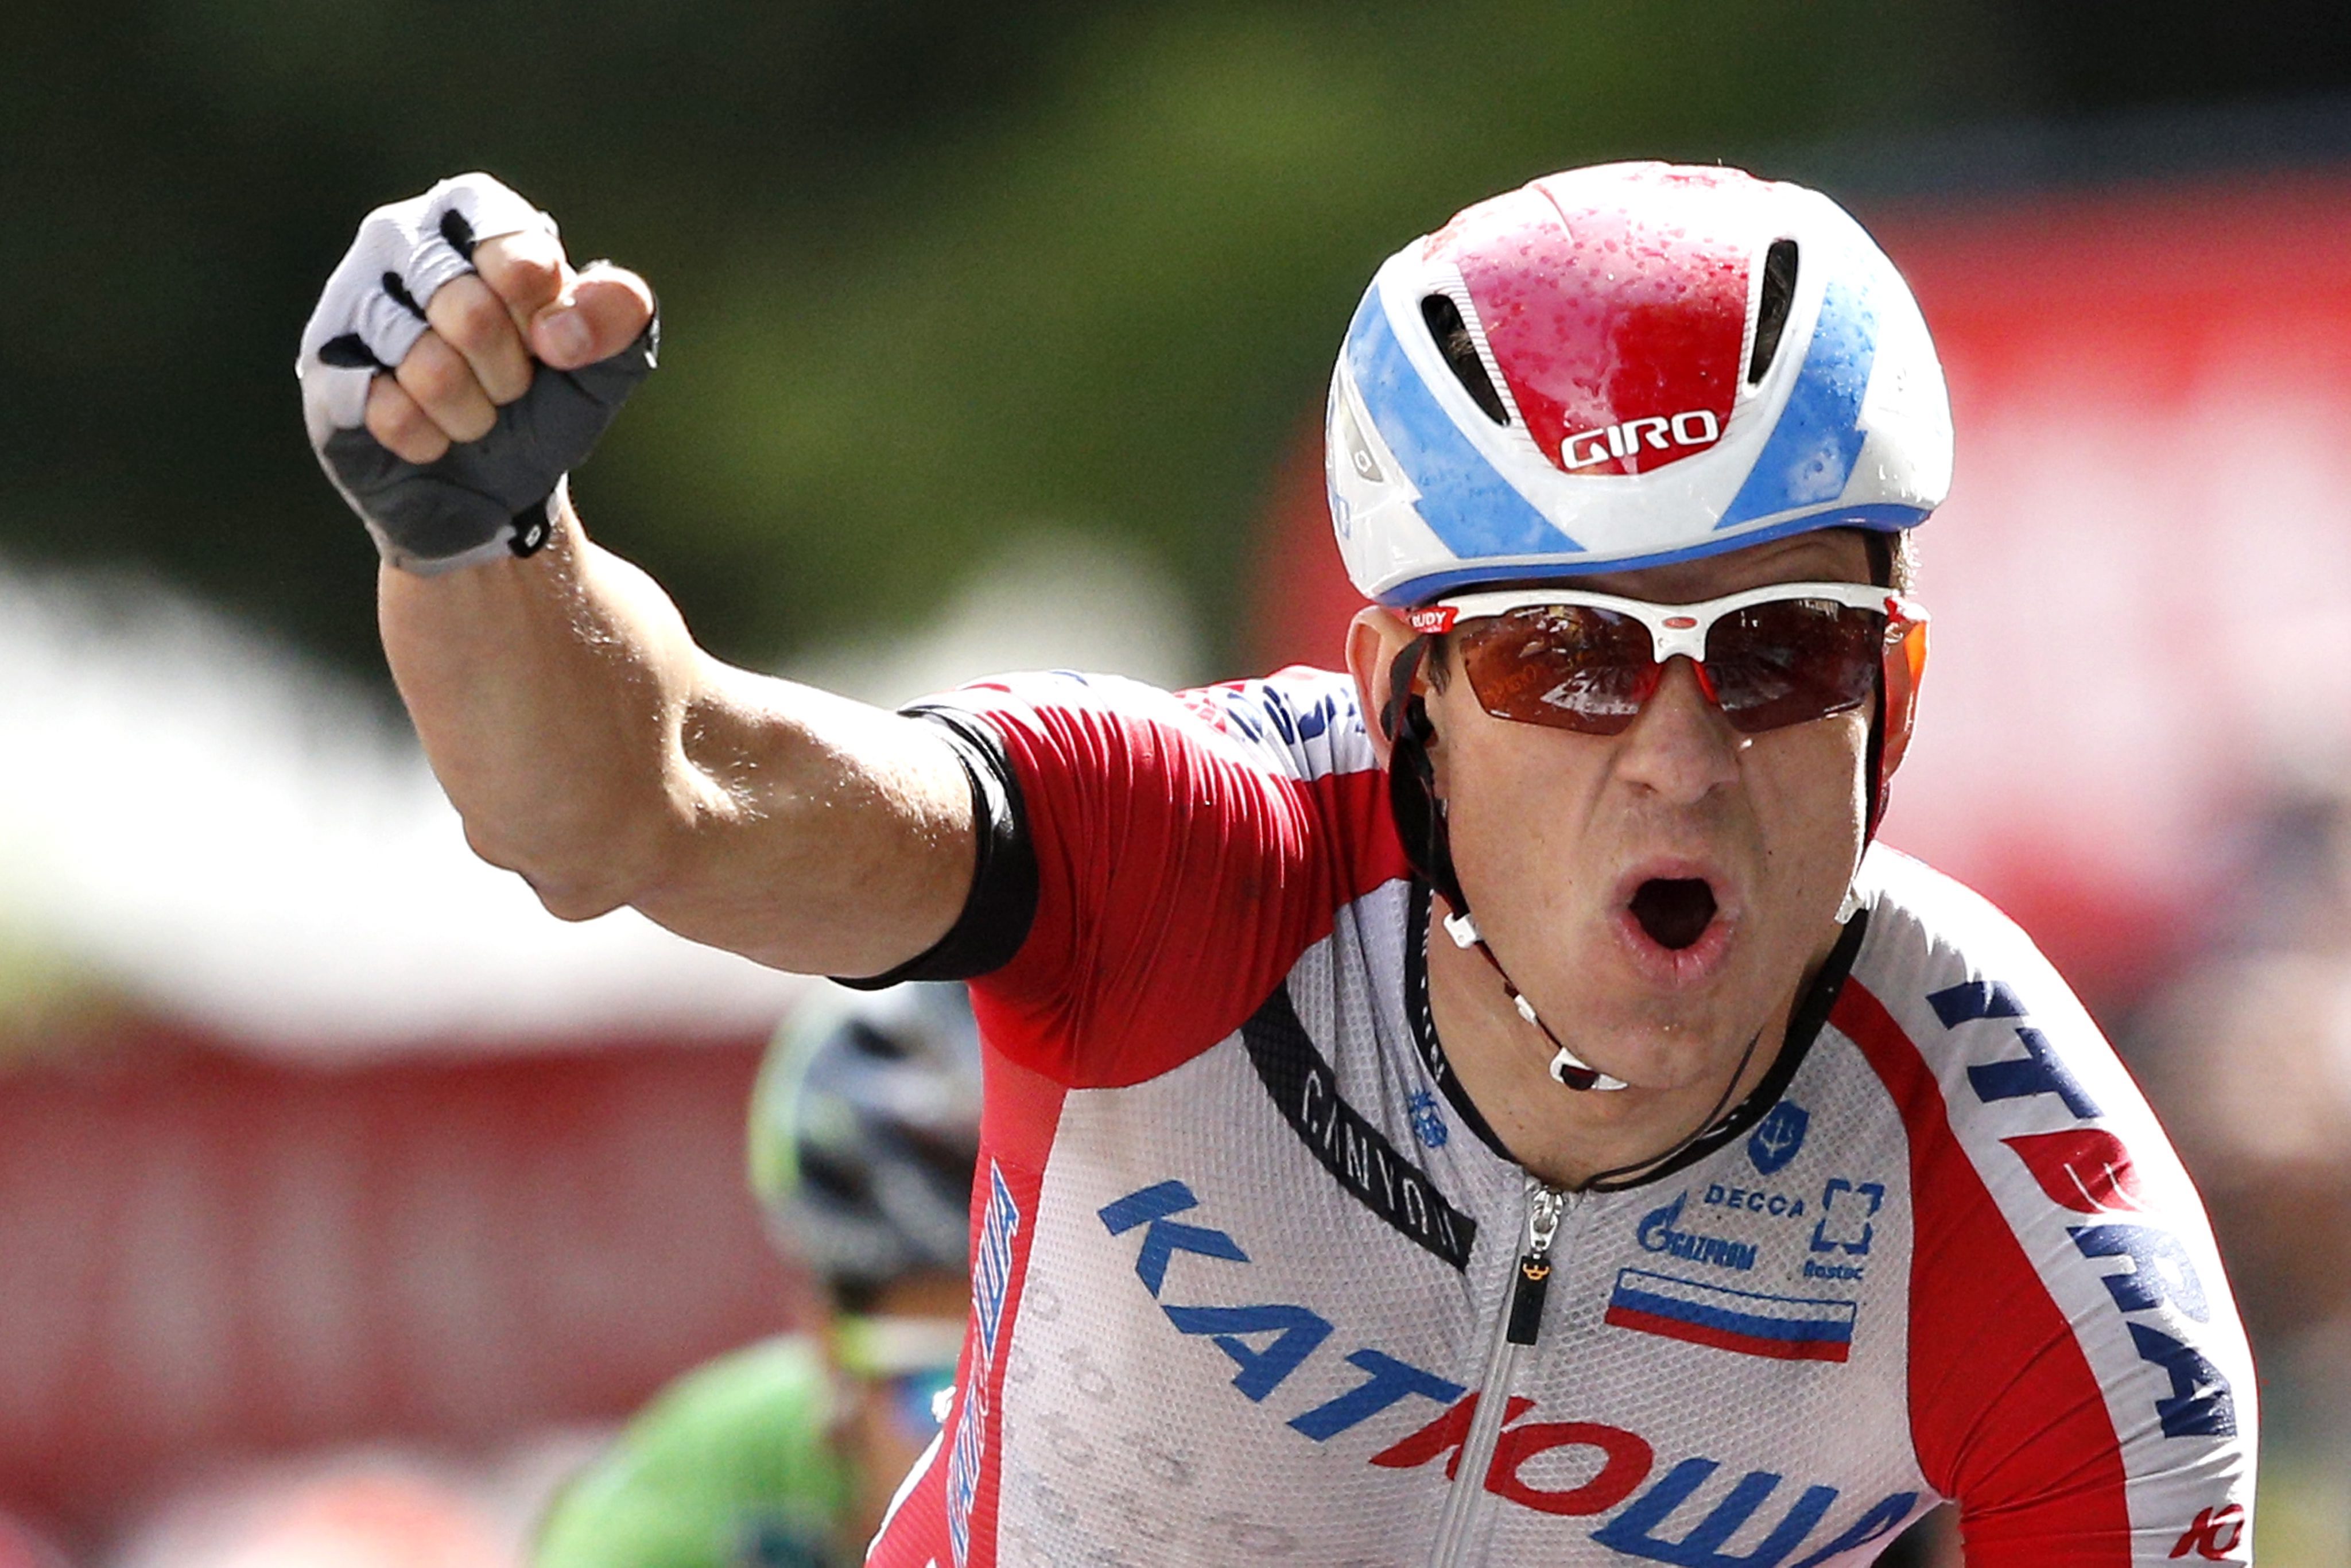 Katusha team rider Alexander Kristoff of Norway celebrates as he crosses the finish to win the 15th stage over 222km from Tallard to Nimes. Photo: EPA